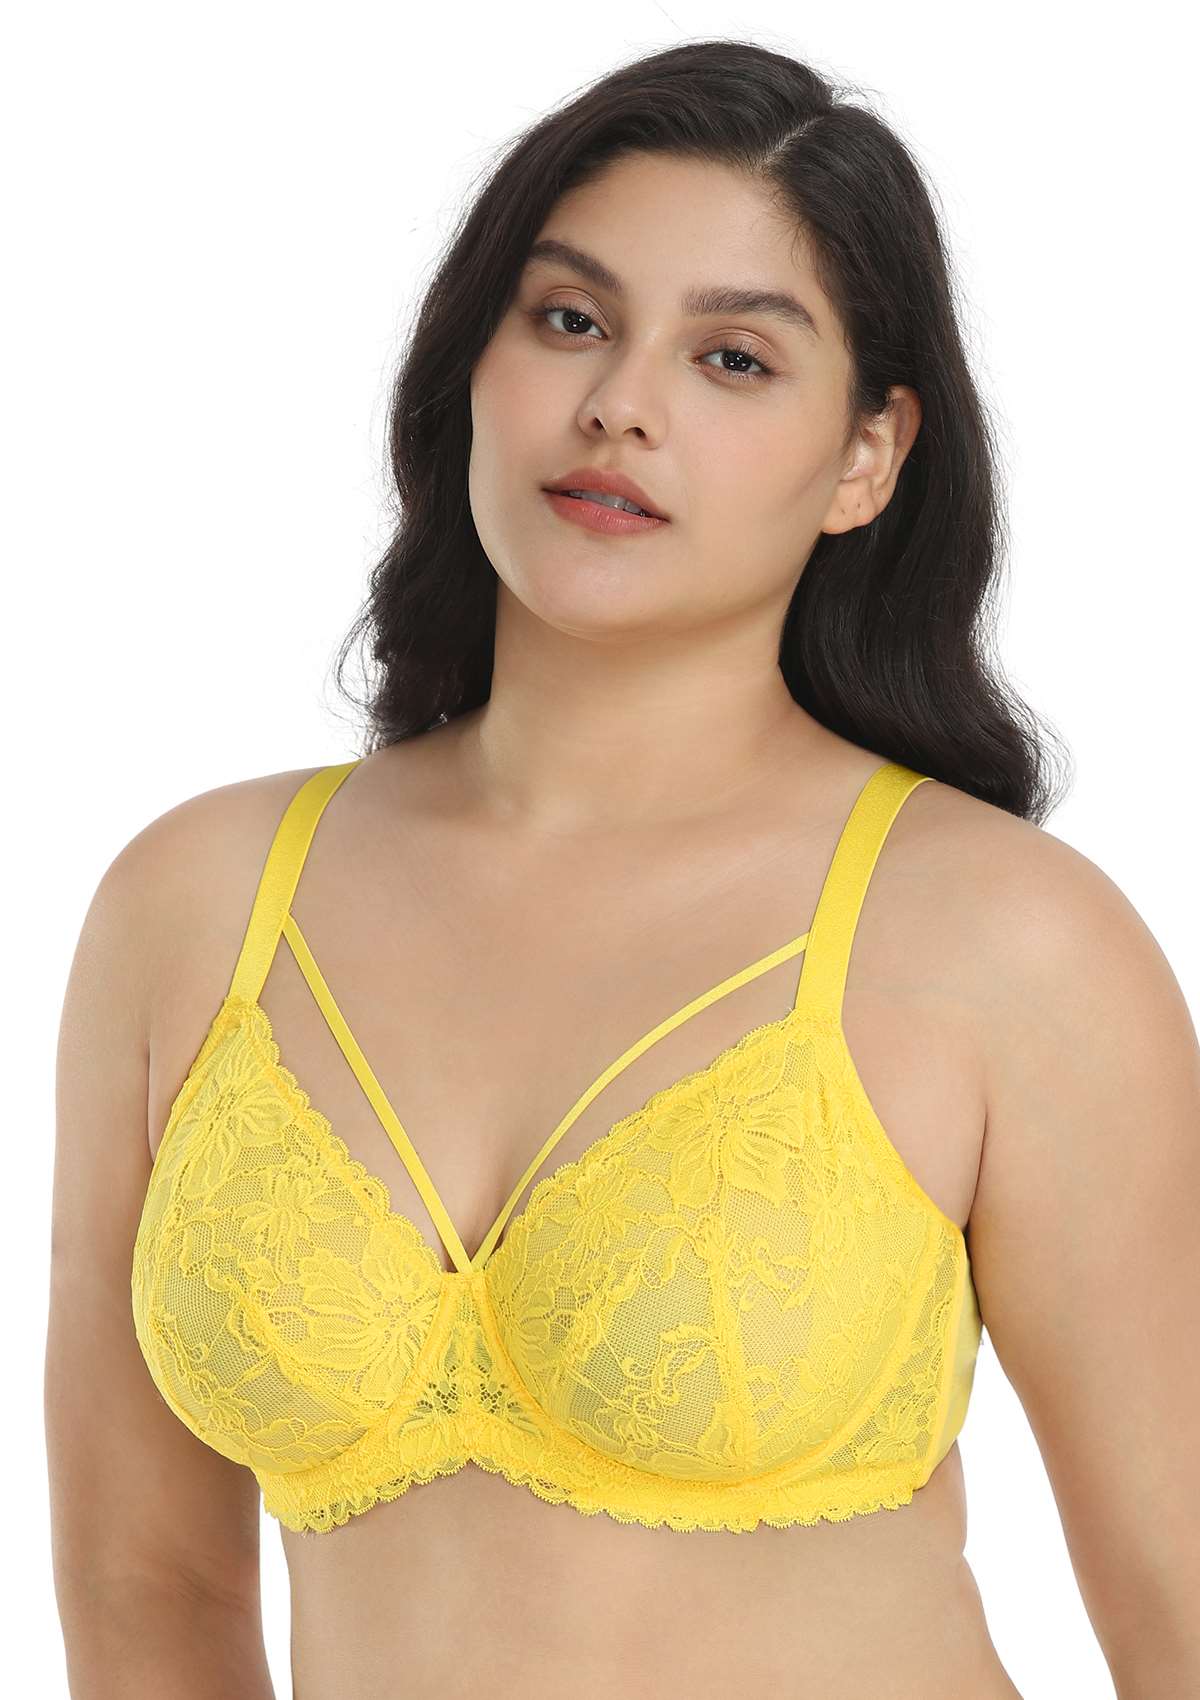 HSIA Unlined Lace Mesh Minimizer Bra For Large Breasts, Full Coverage - Bright Yellow / 34 / H